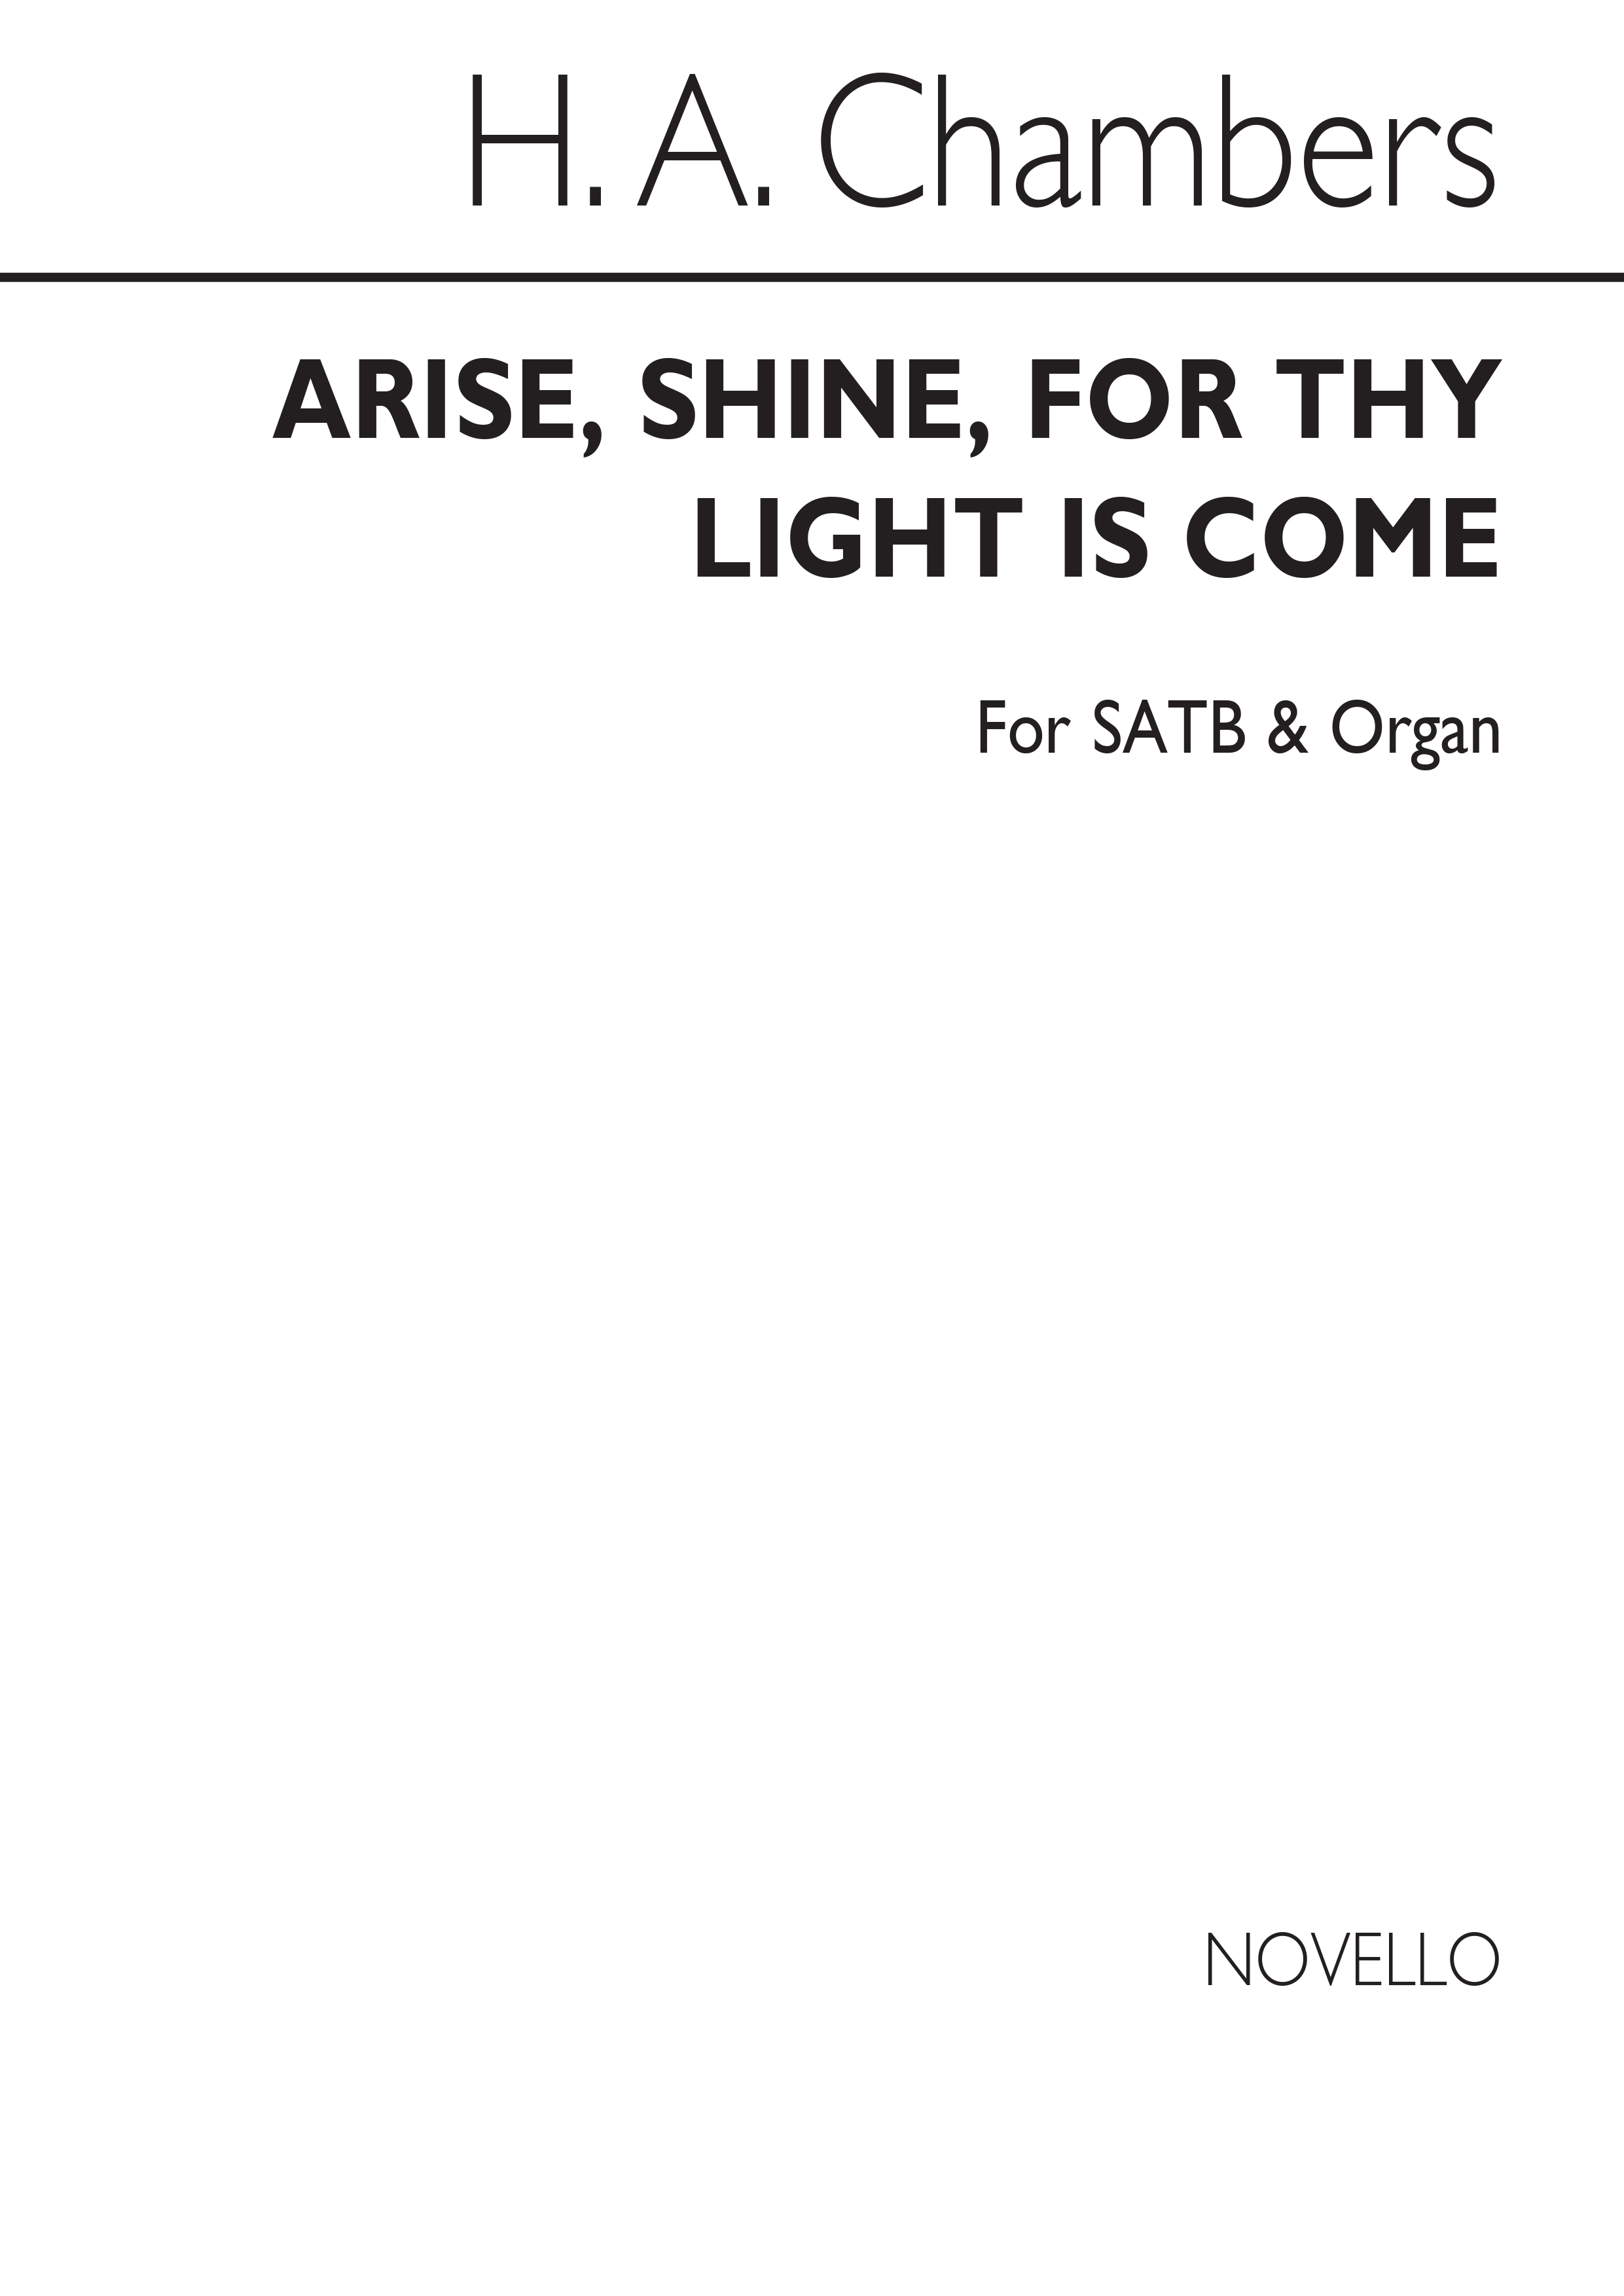 H.A. Chambers: Arise Shine For Thy Light Is Come